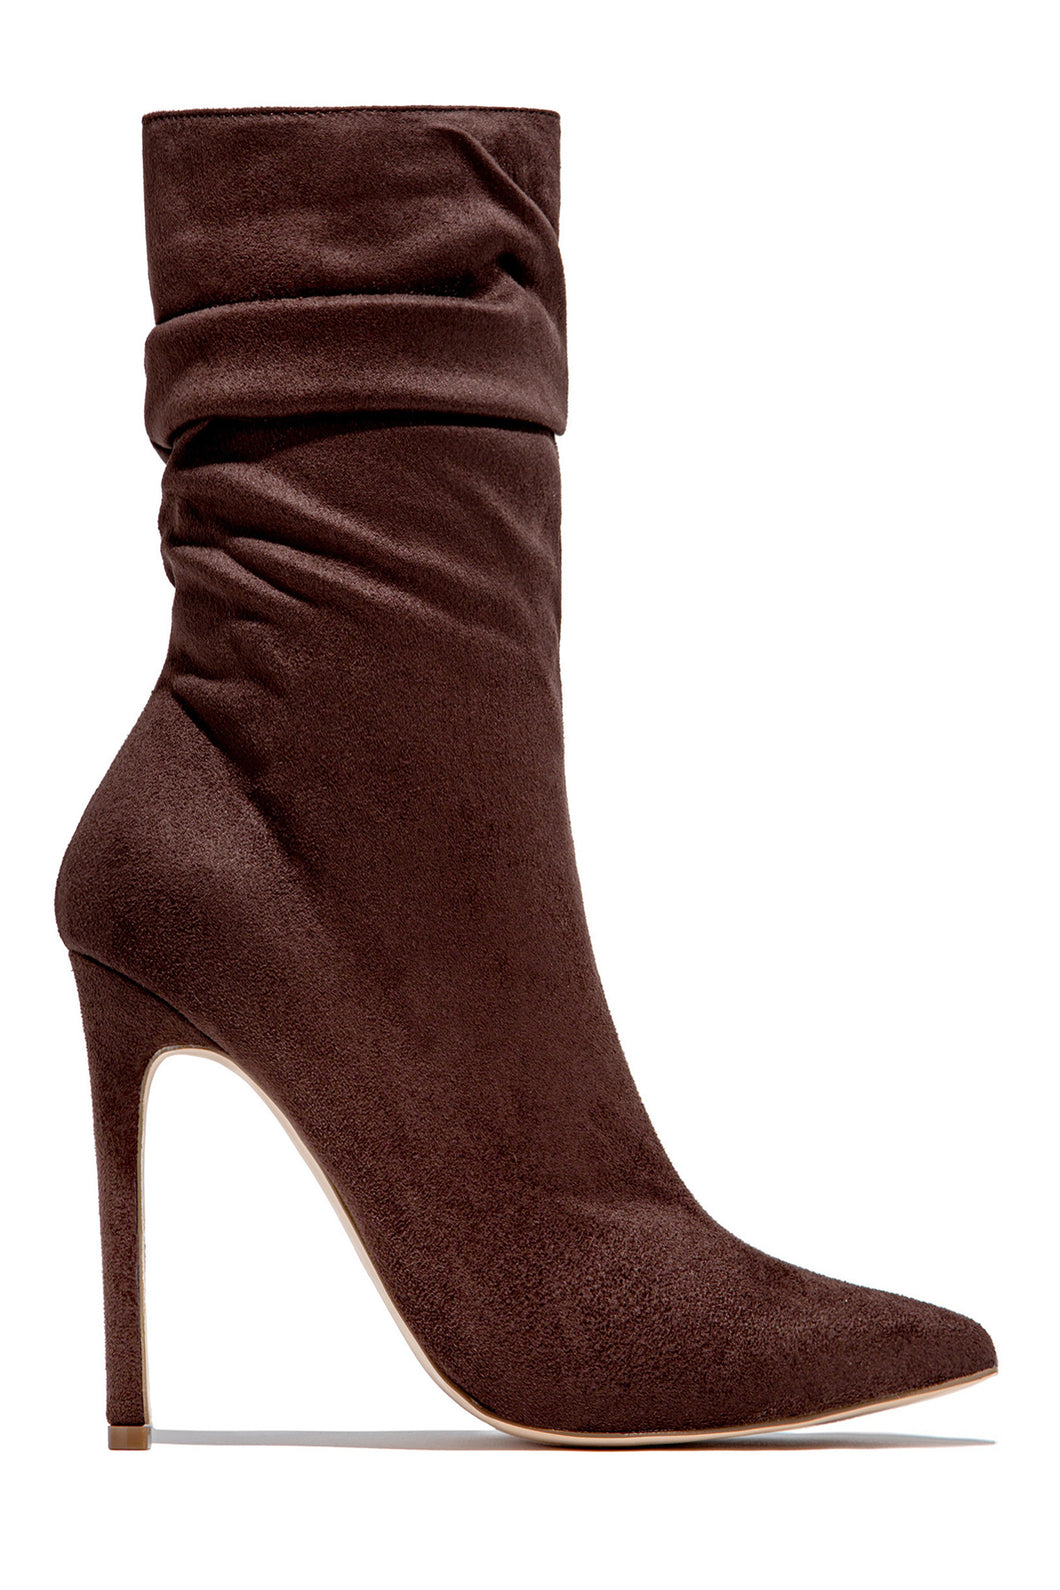 Solemate Ruched Detailed Ankle Heel Boots - Mocha